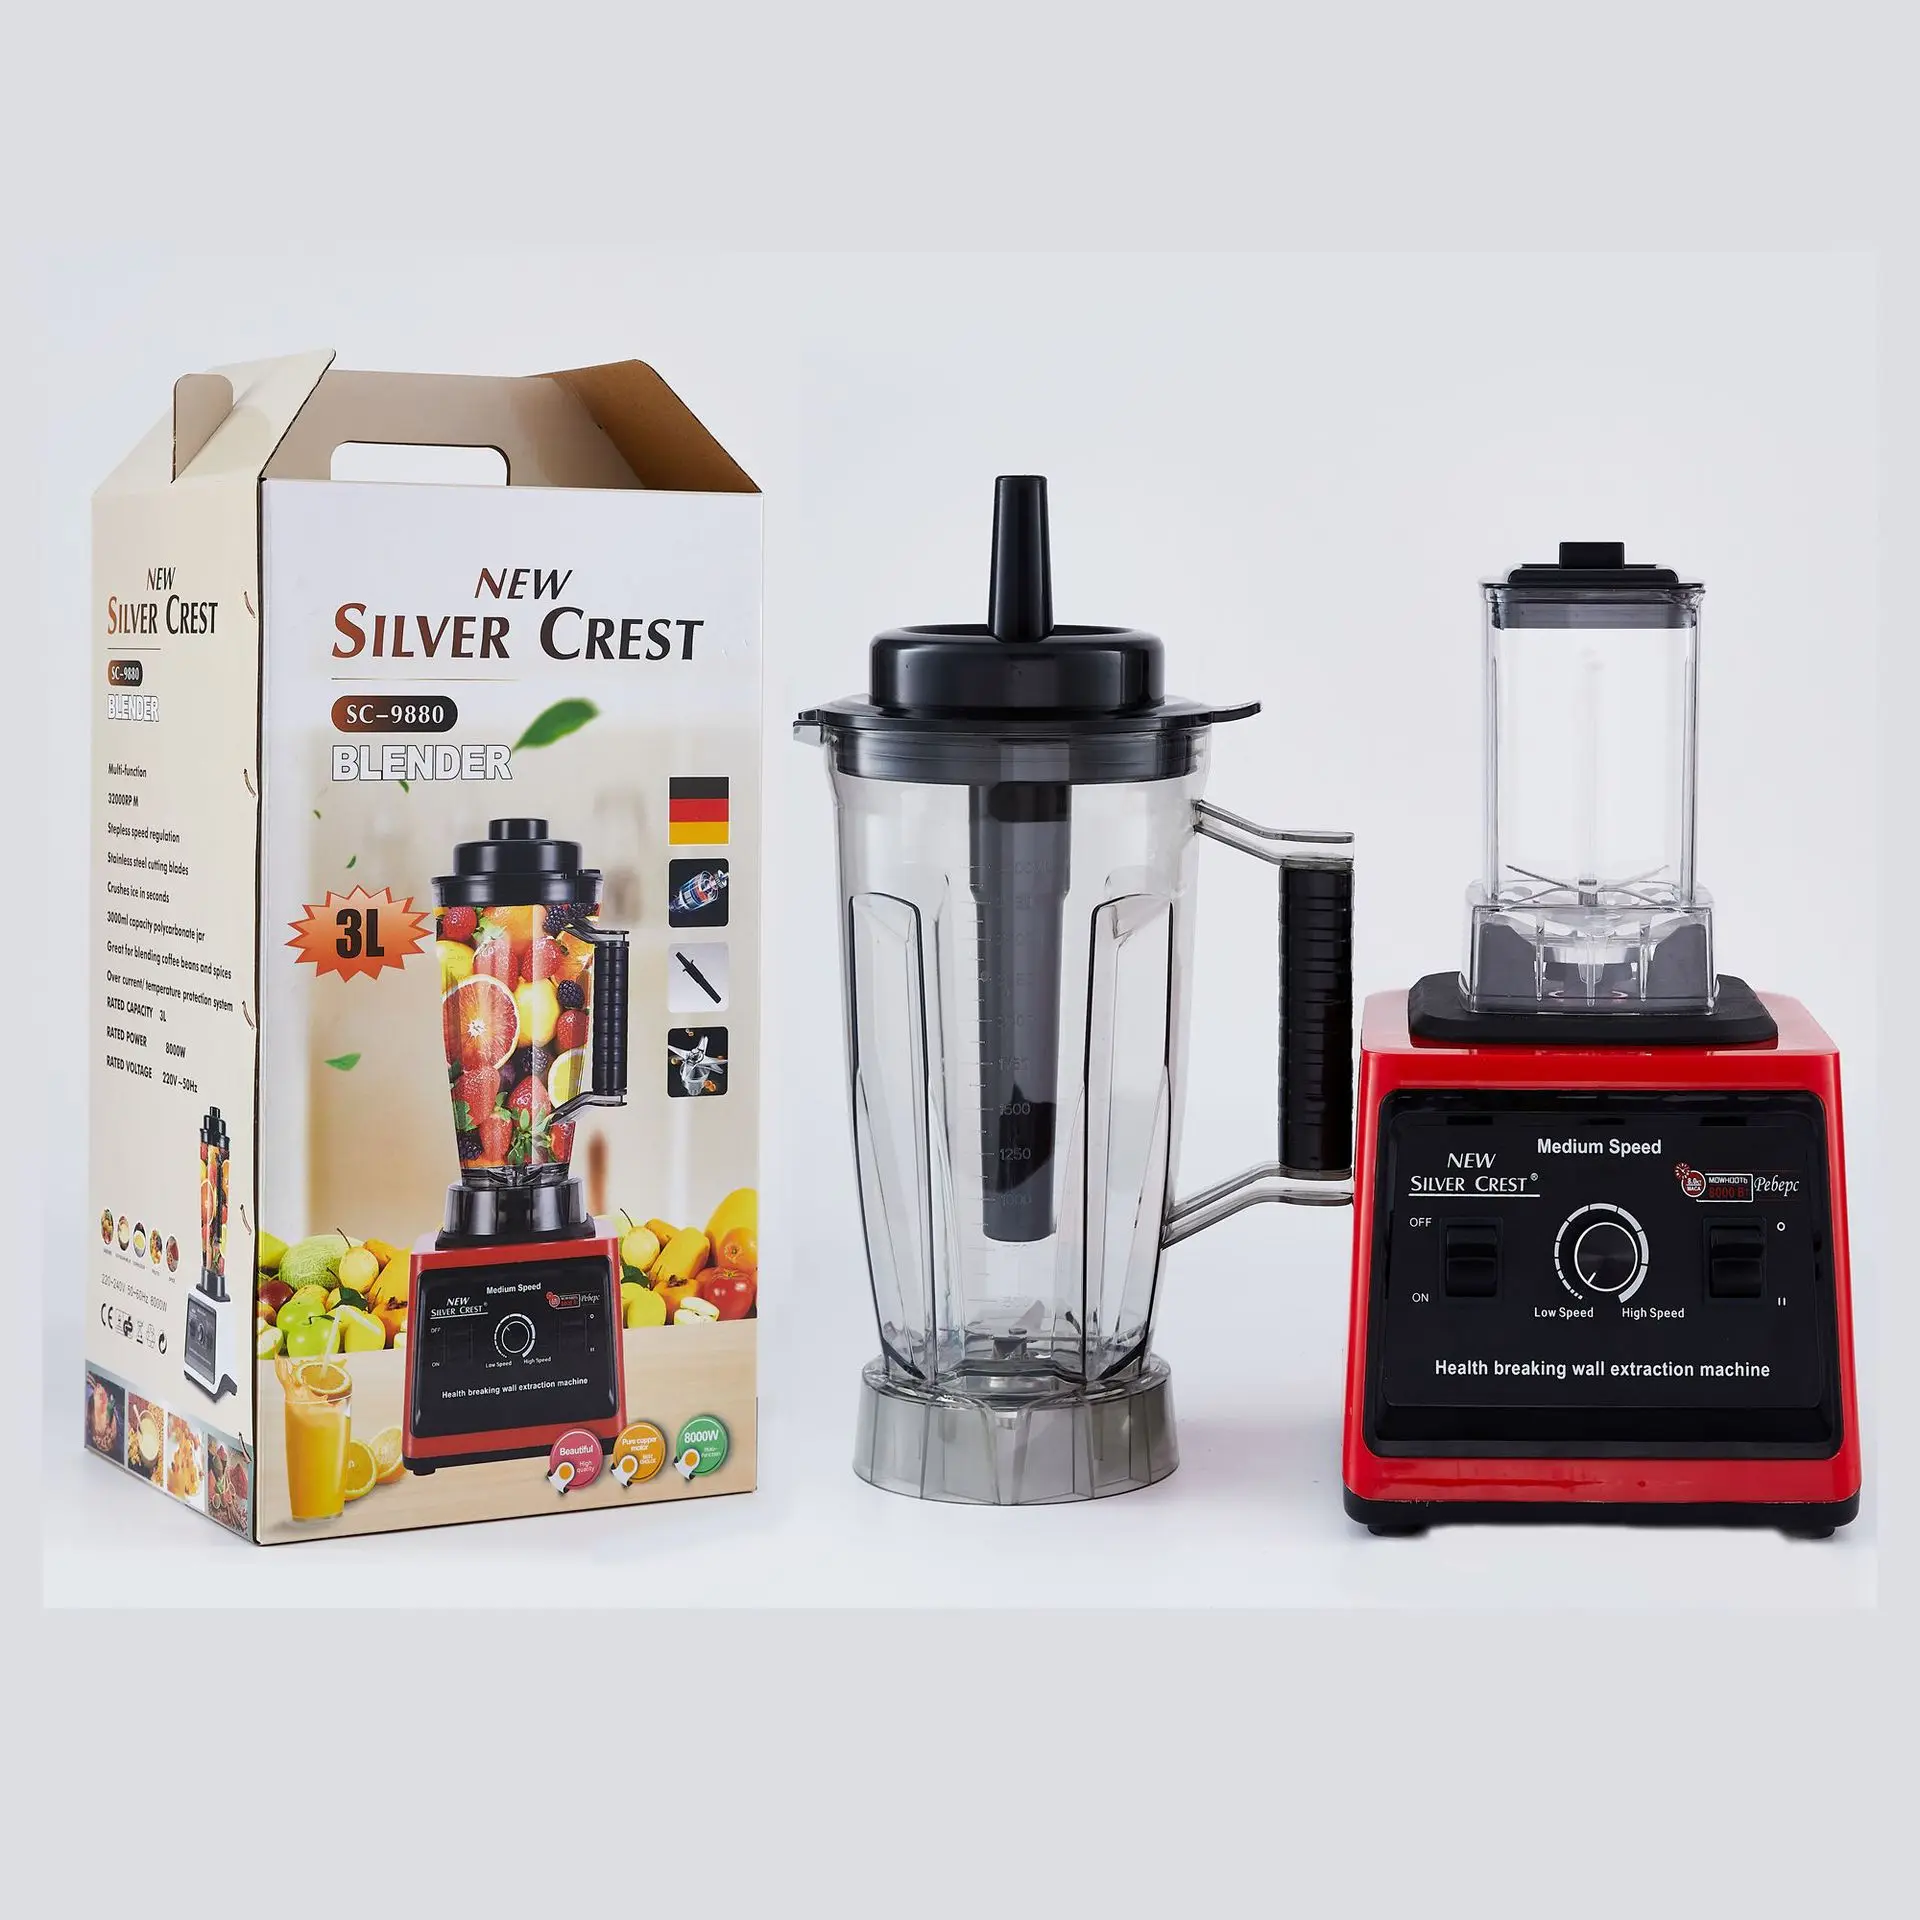 Moulinex Kitchen Sc-1589 8000w In 1 Countertop Professional Table Commercial Mixer Heavy Duty Silver Crest Blender - Buy Duty Silver Crest Blender,Blender,Sc-1589 8000w Silver Crest Product Alibaba.com